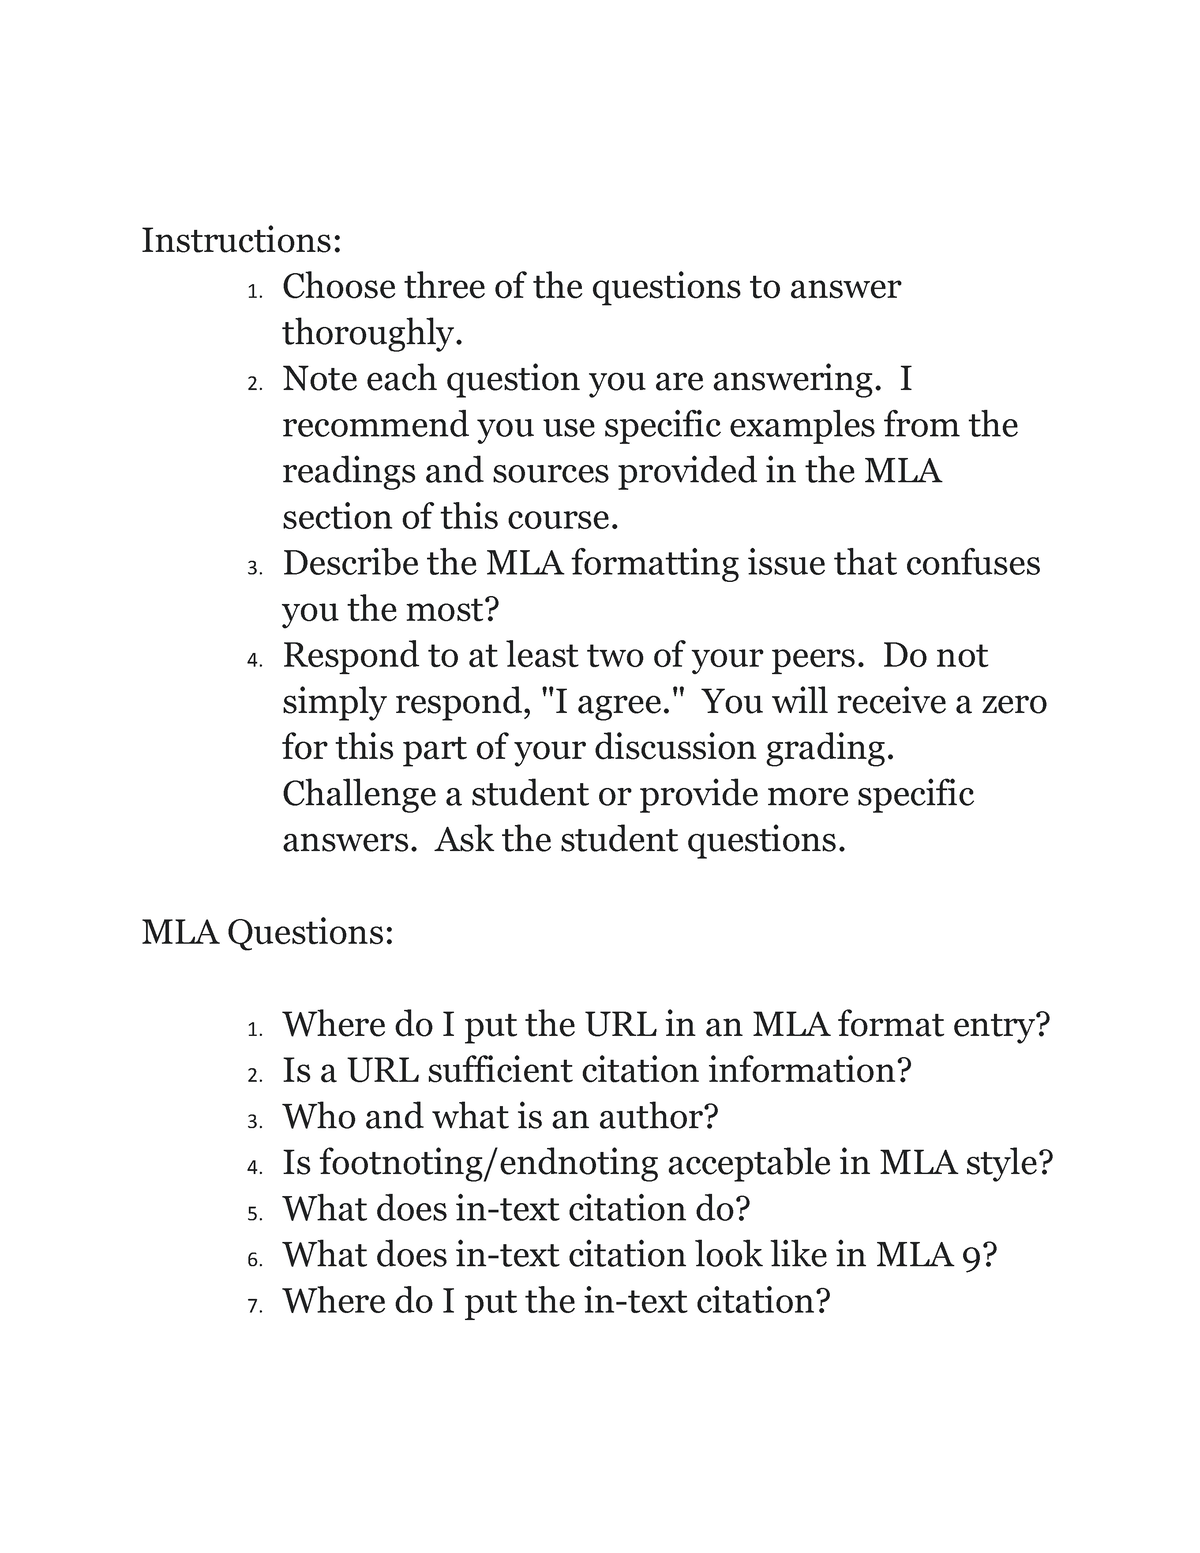 MLA Formatting - Instructions: 1. Choose three of the questions to ...